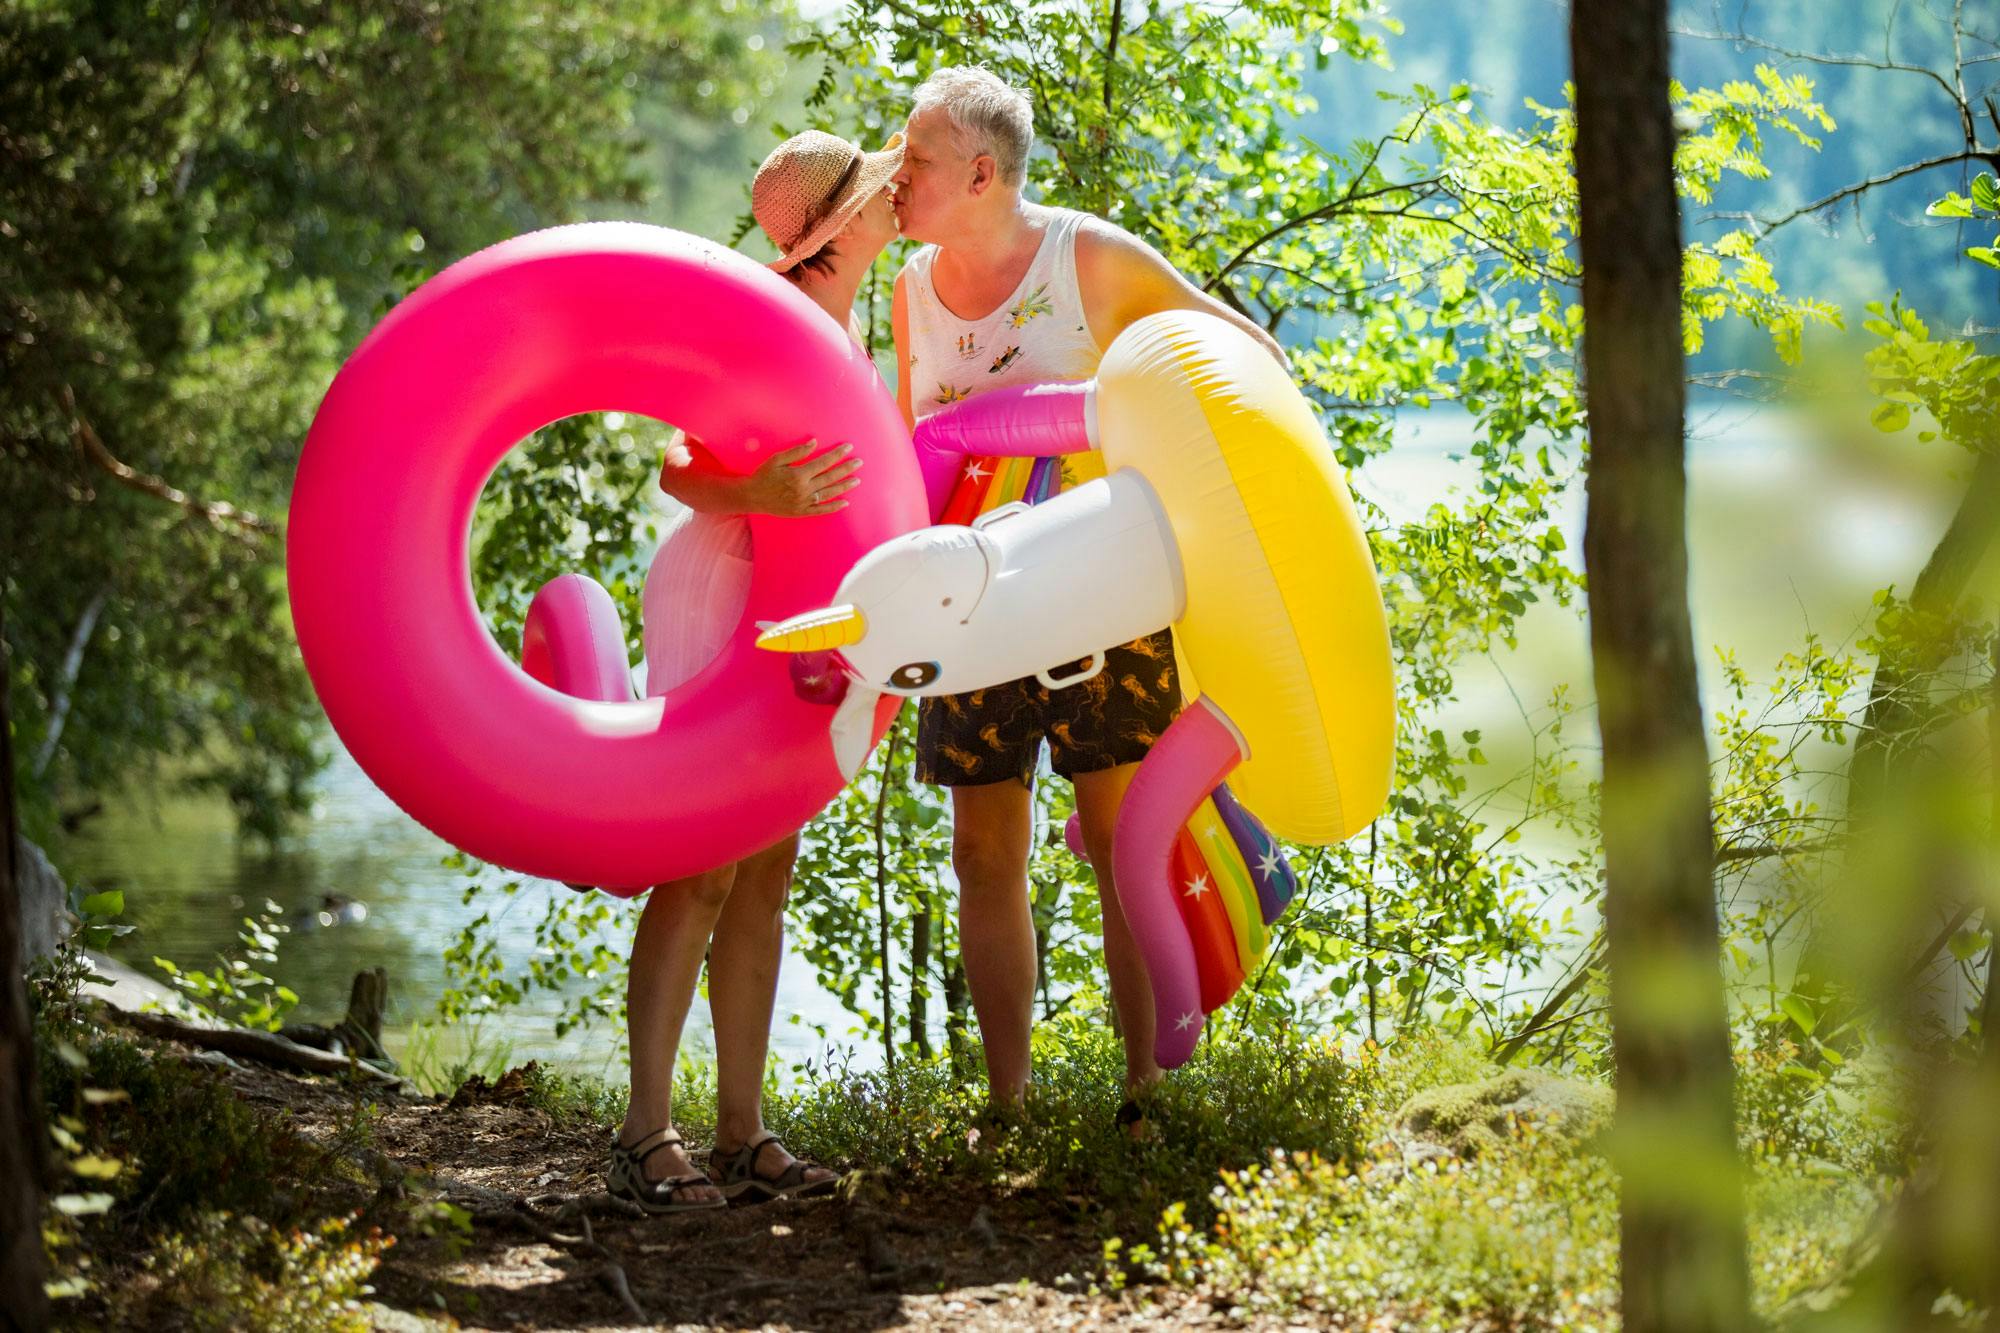 A woman and a man gently kissing while carrying inflatable water toys